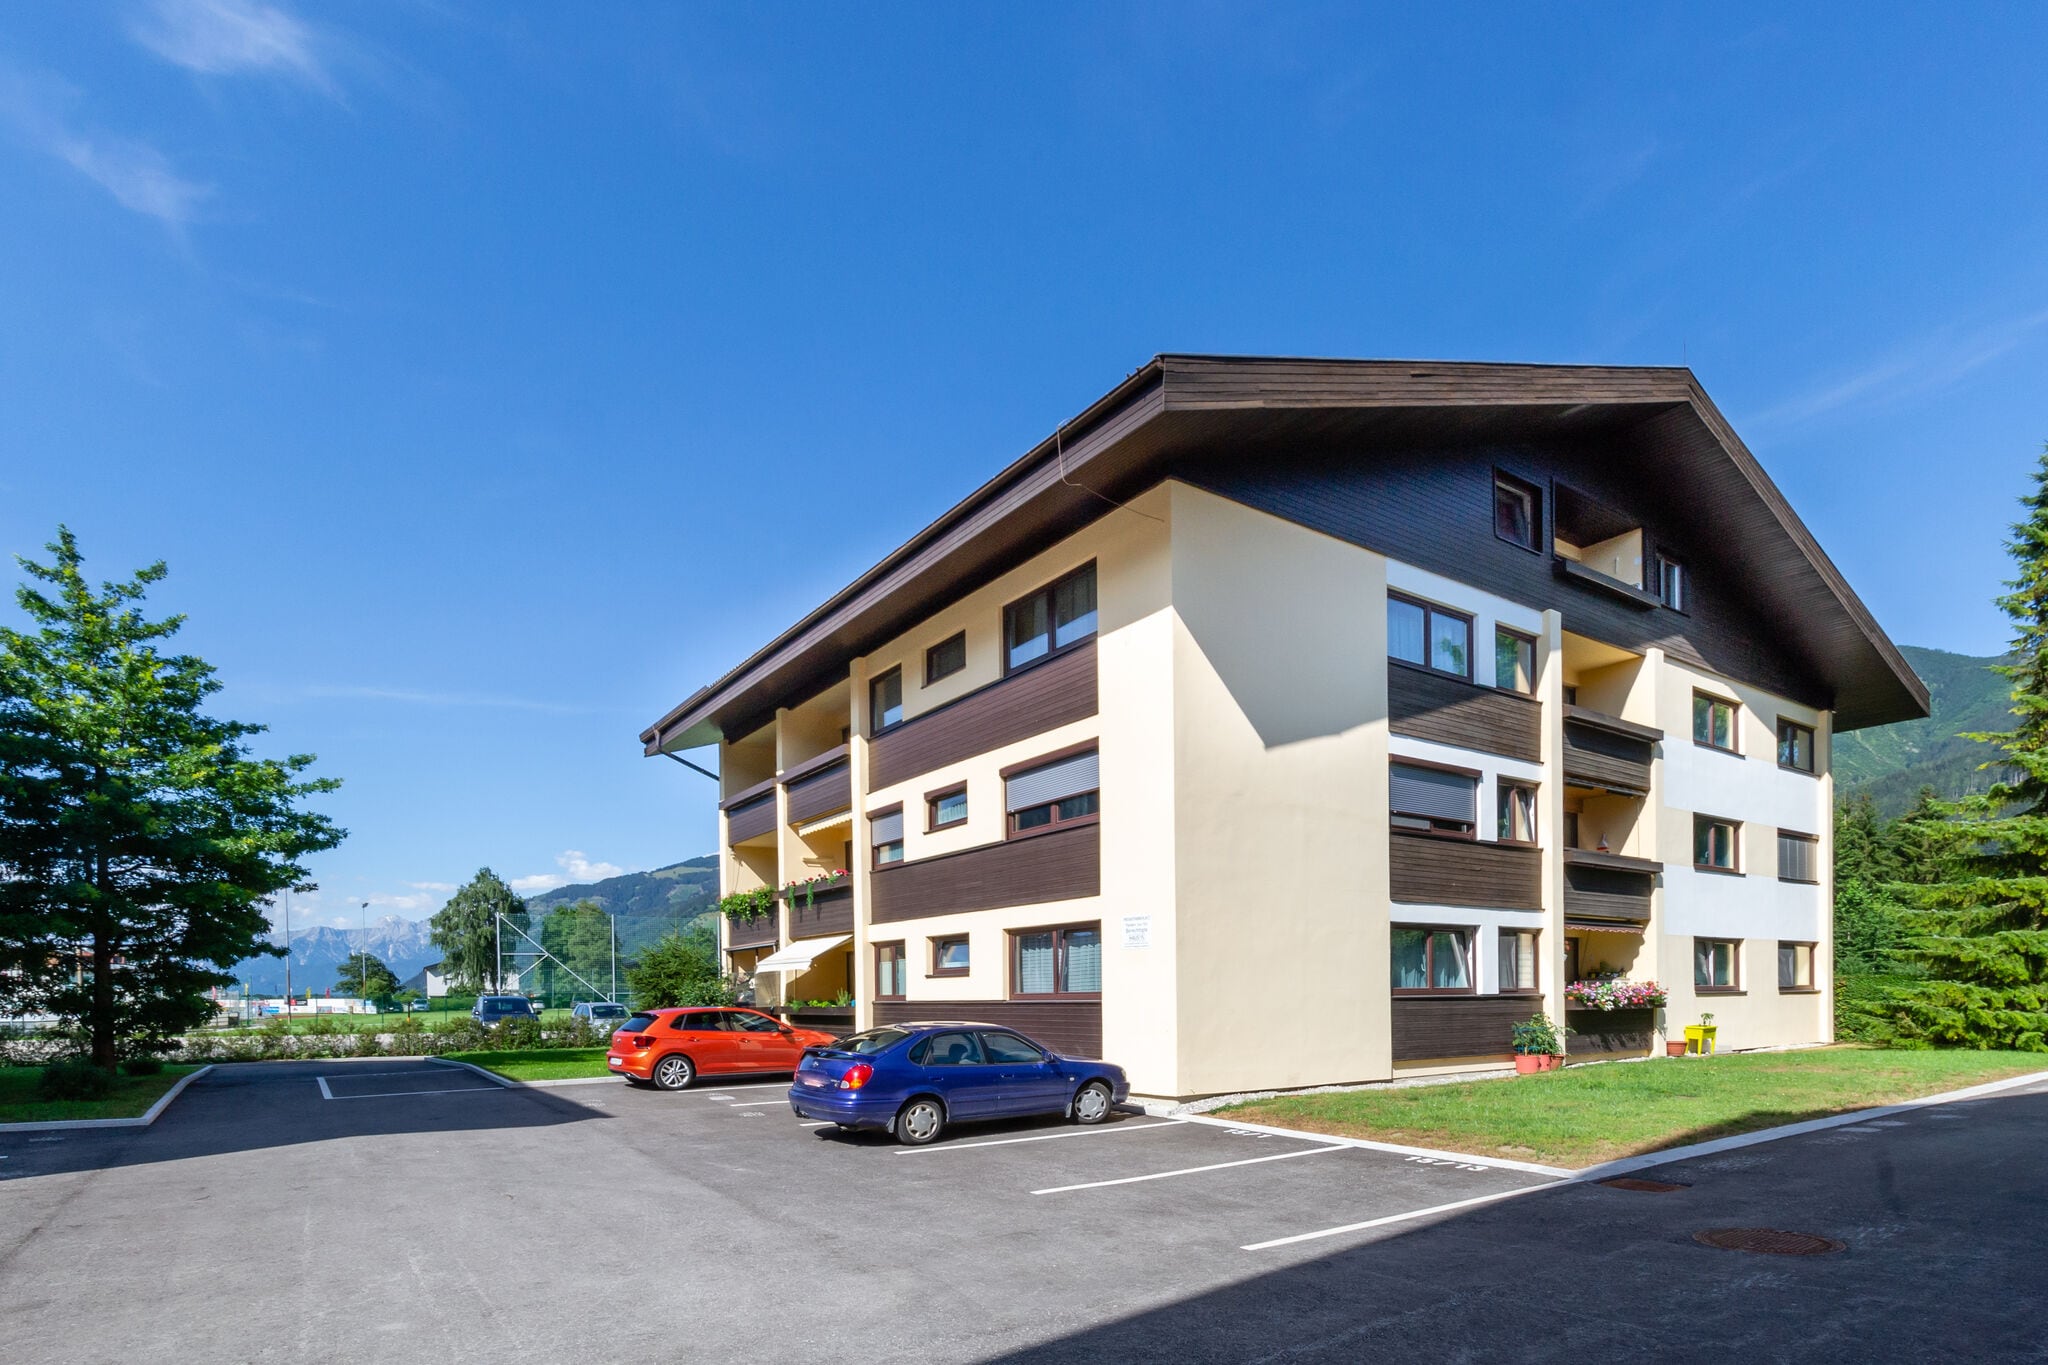 Apartment in Zell am See near ski resorts